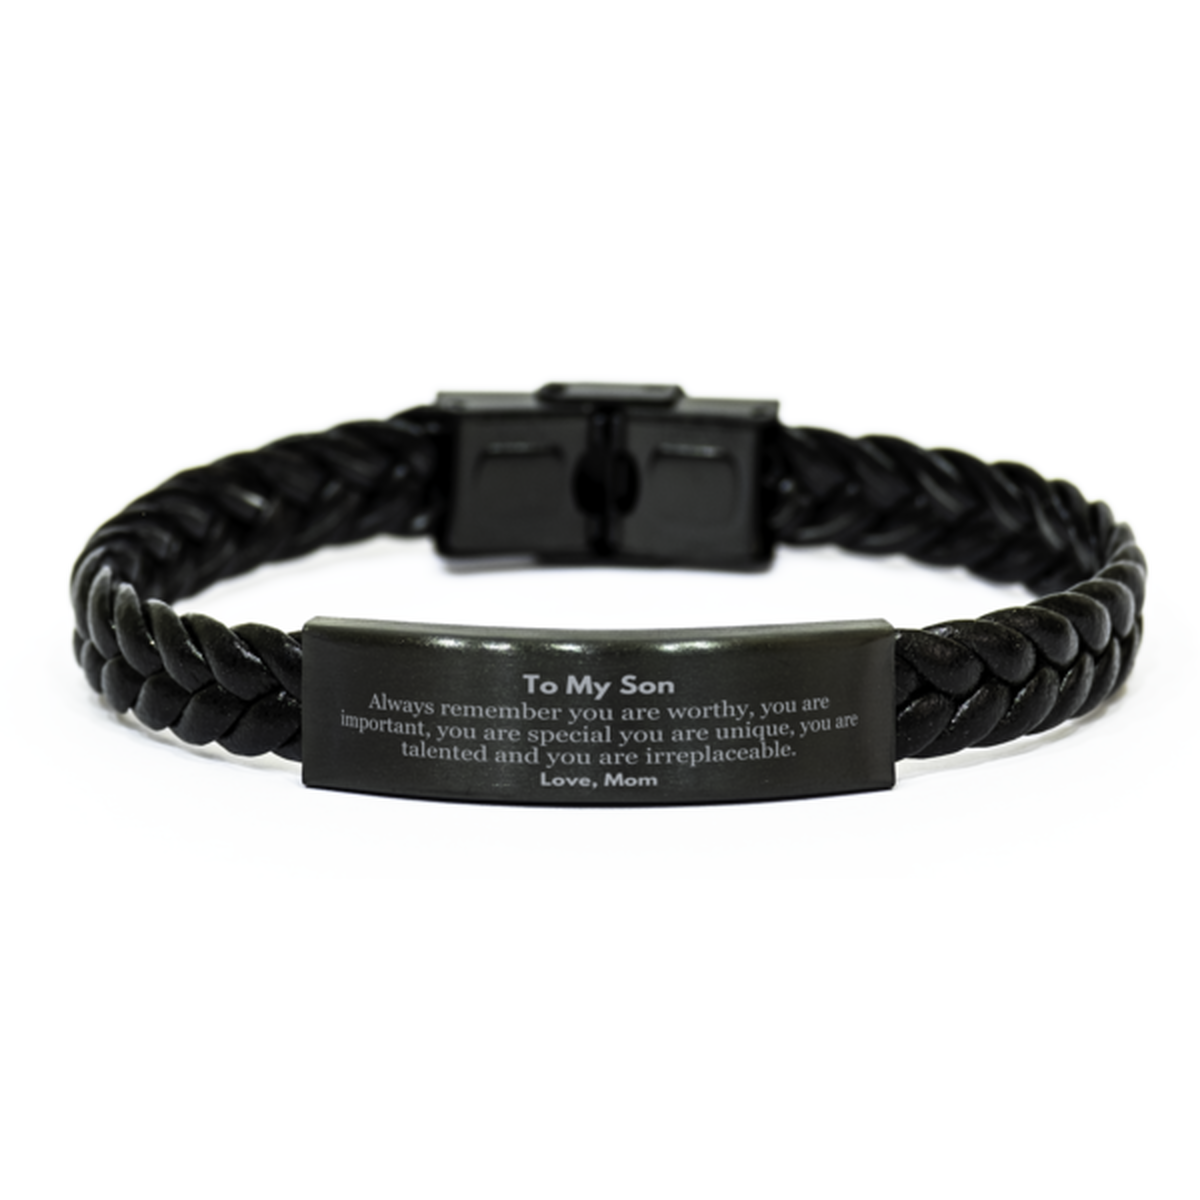 Son Birthday Gifts from Mom, Inspirational Braided Leather Bracelet for Son Christmas Graduation Gifts for Son Always remember you are worthy, you are important. Love, Mom